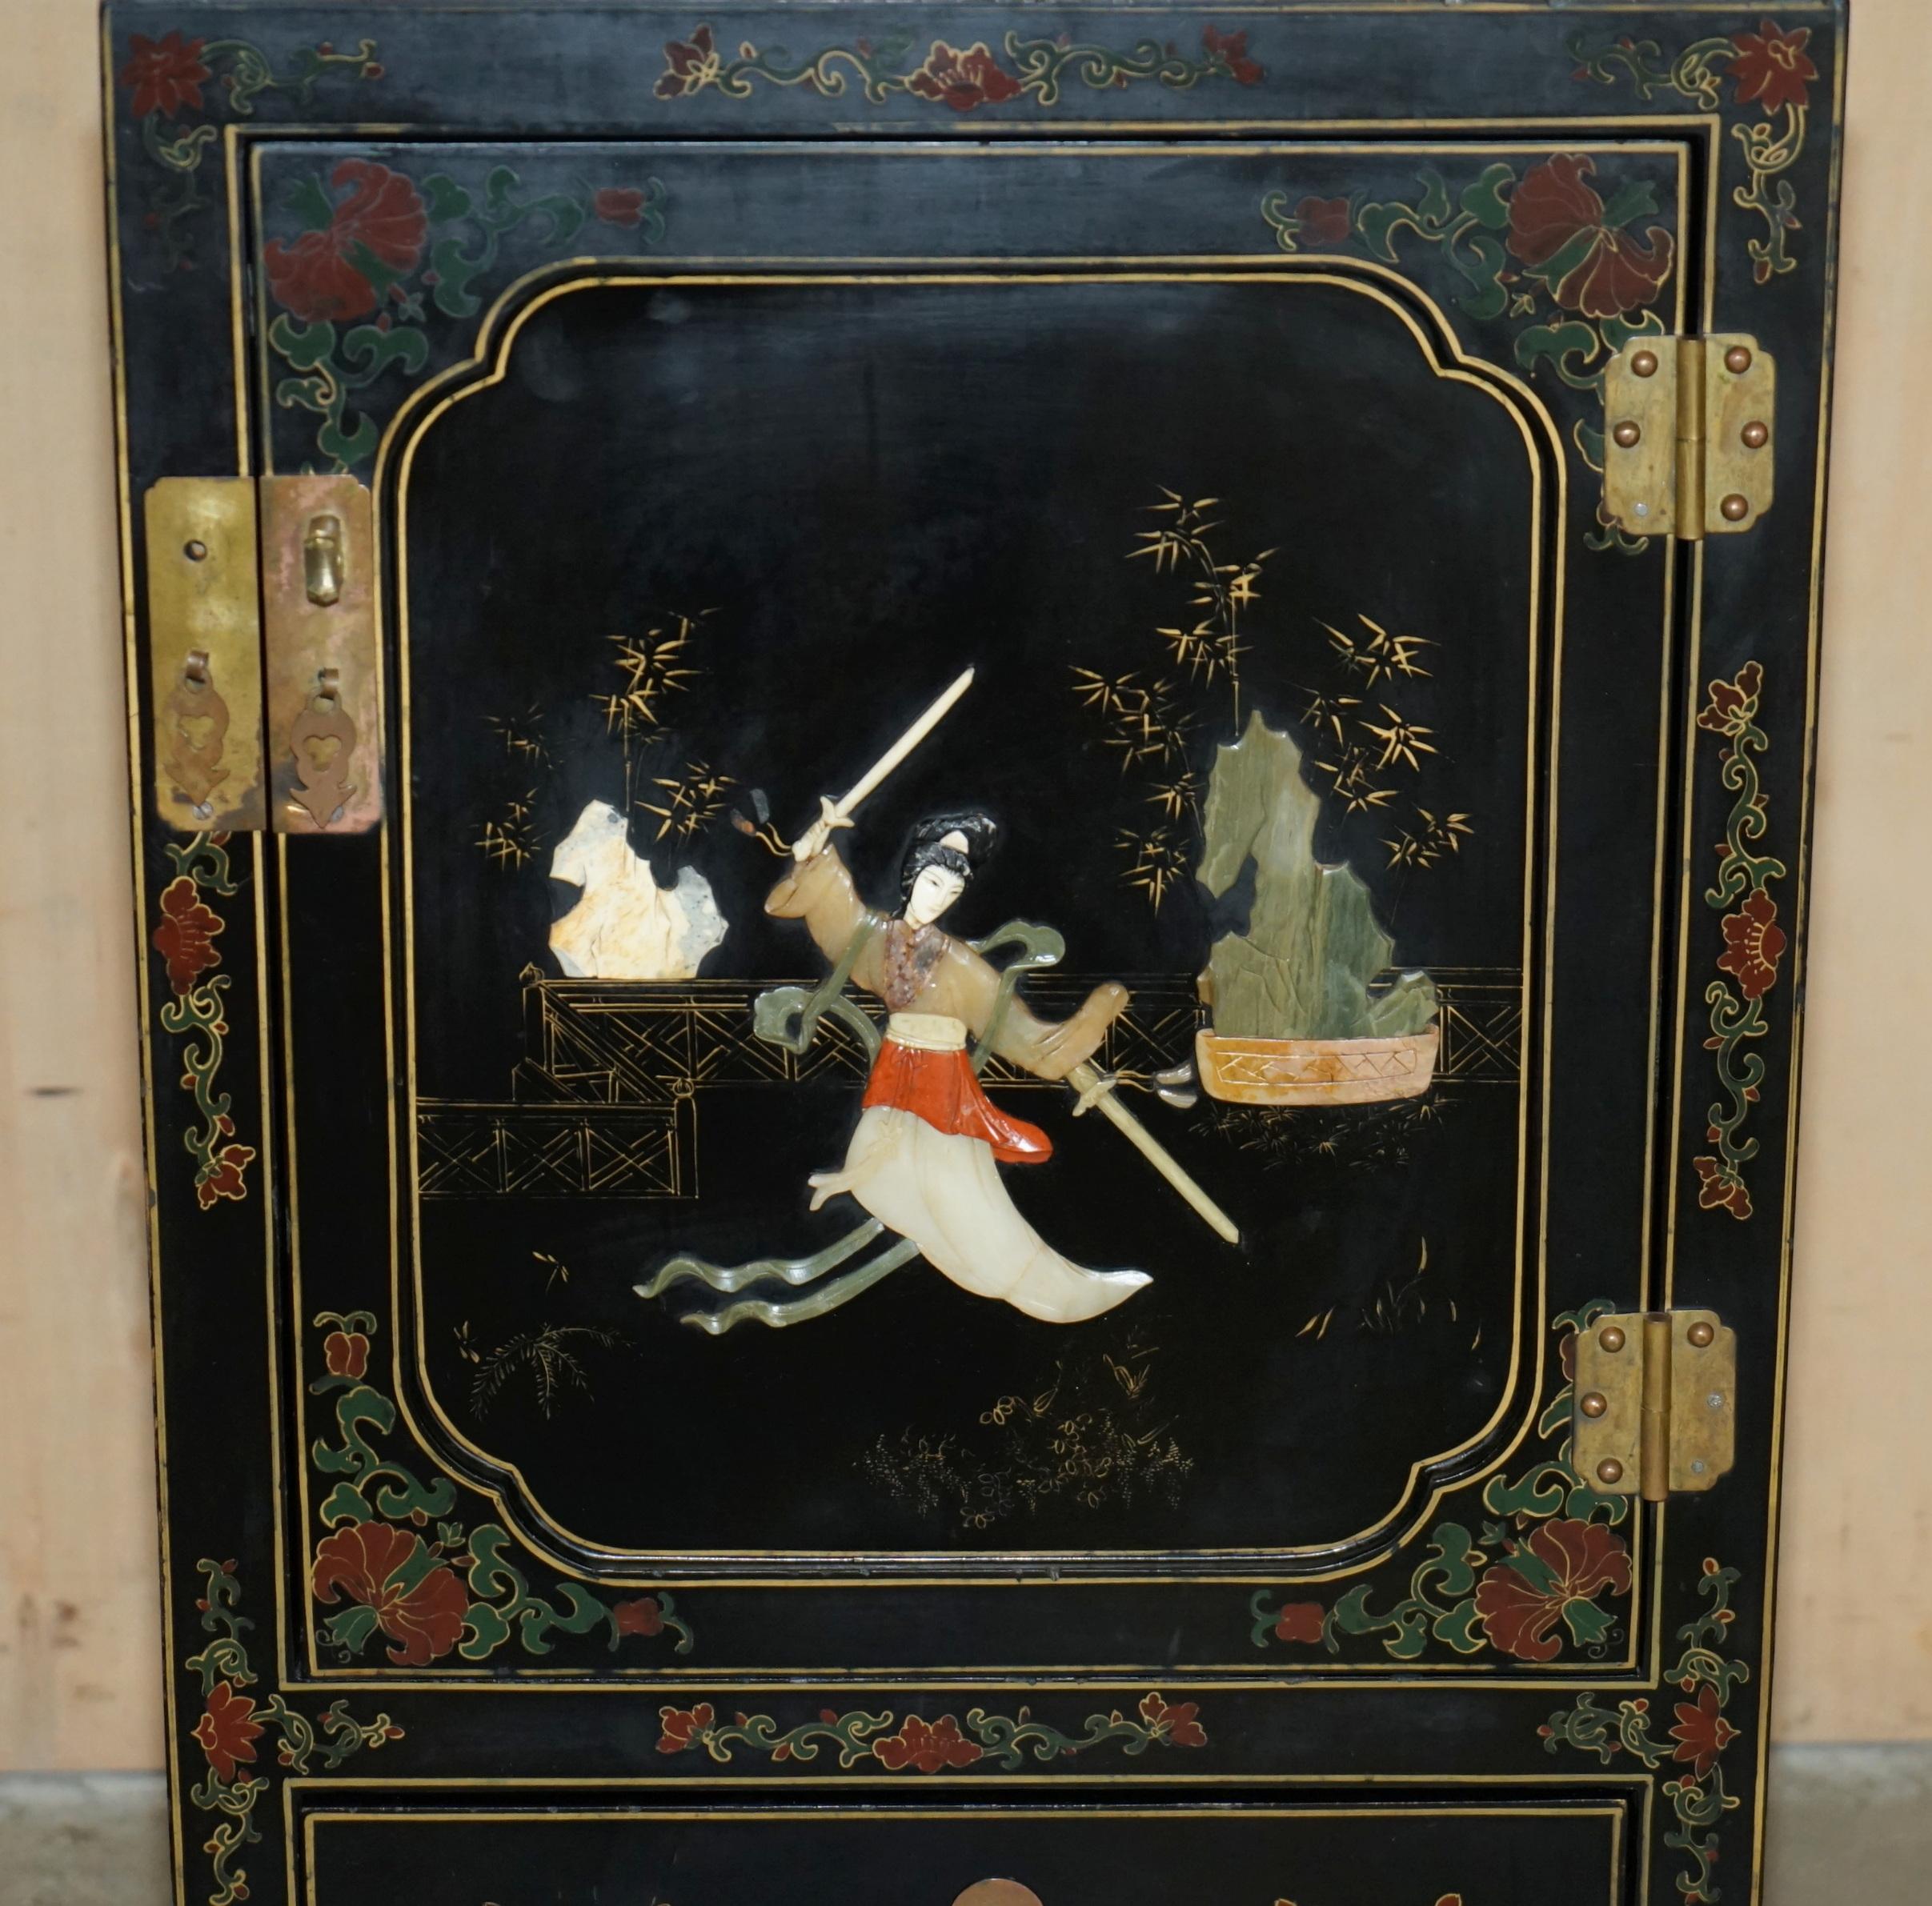 LOVELY ViNTAGE CHINESE CHINOISERIE SAMURAI WARRIOR LACQUER SIDE CABINET SOAPSTON (Chinoiserie) im Angebot